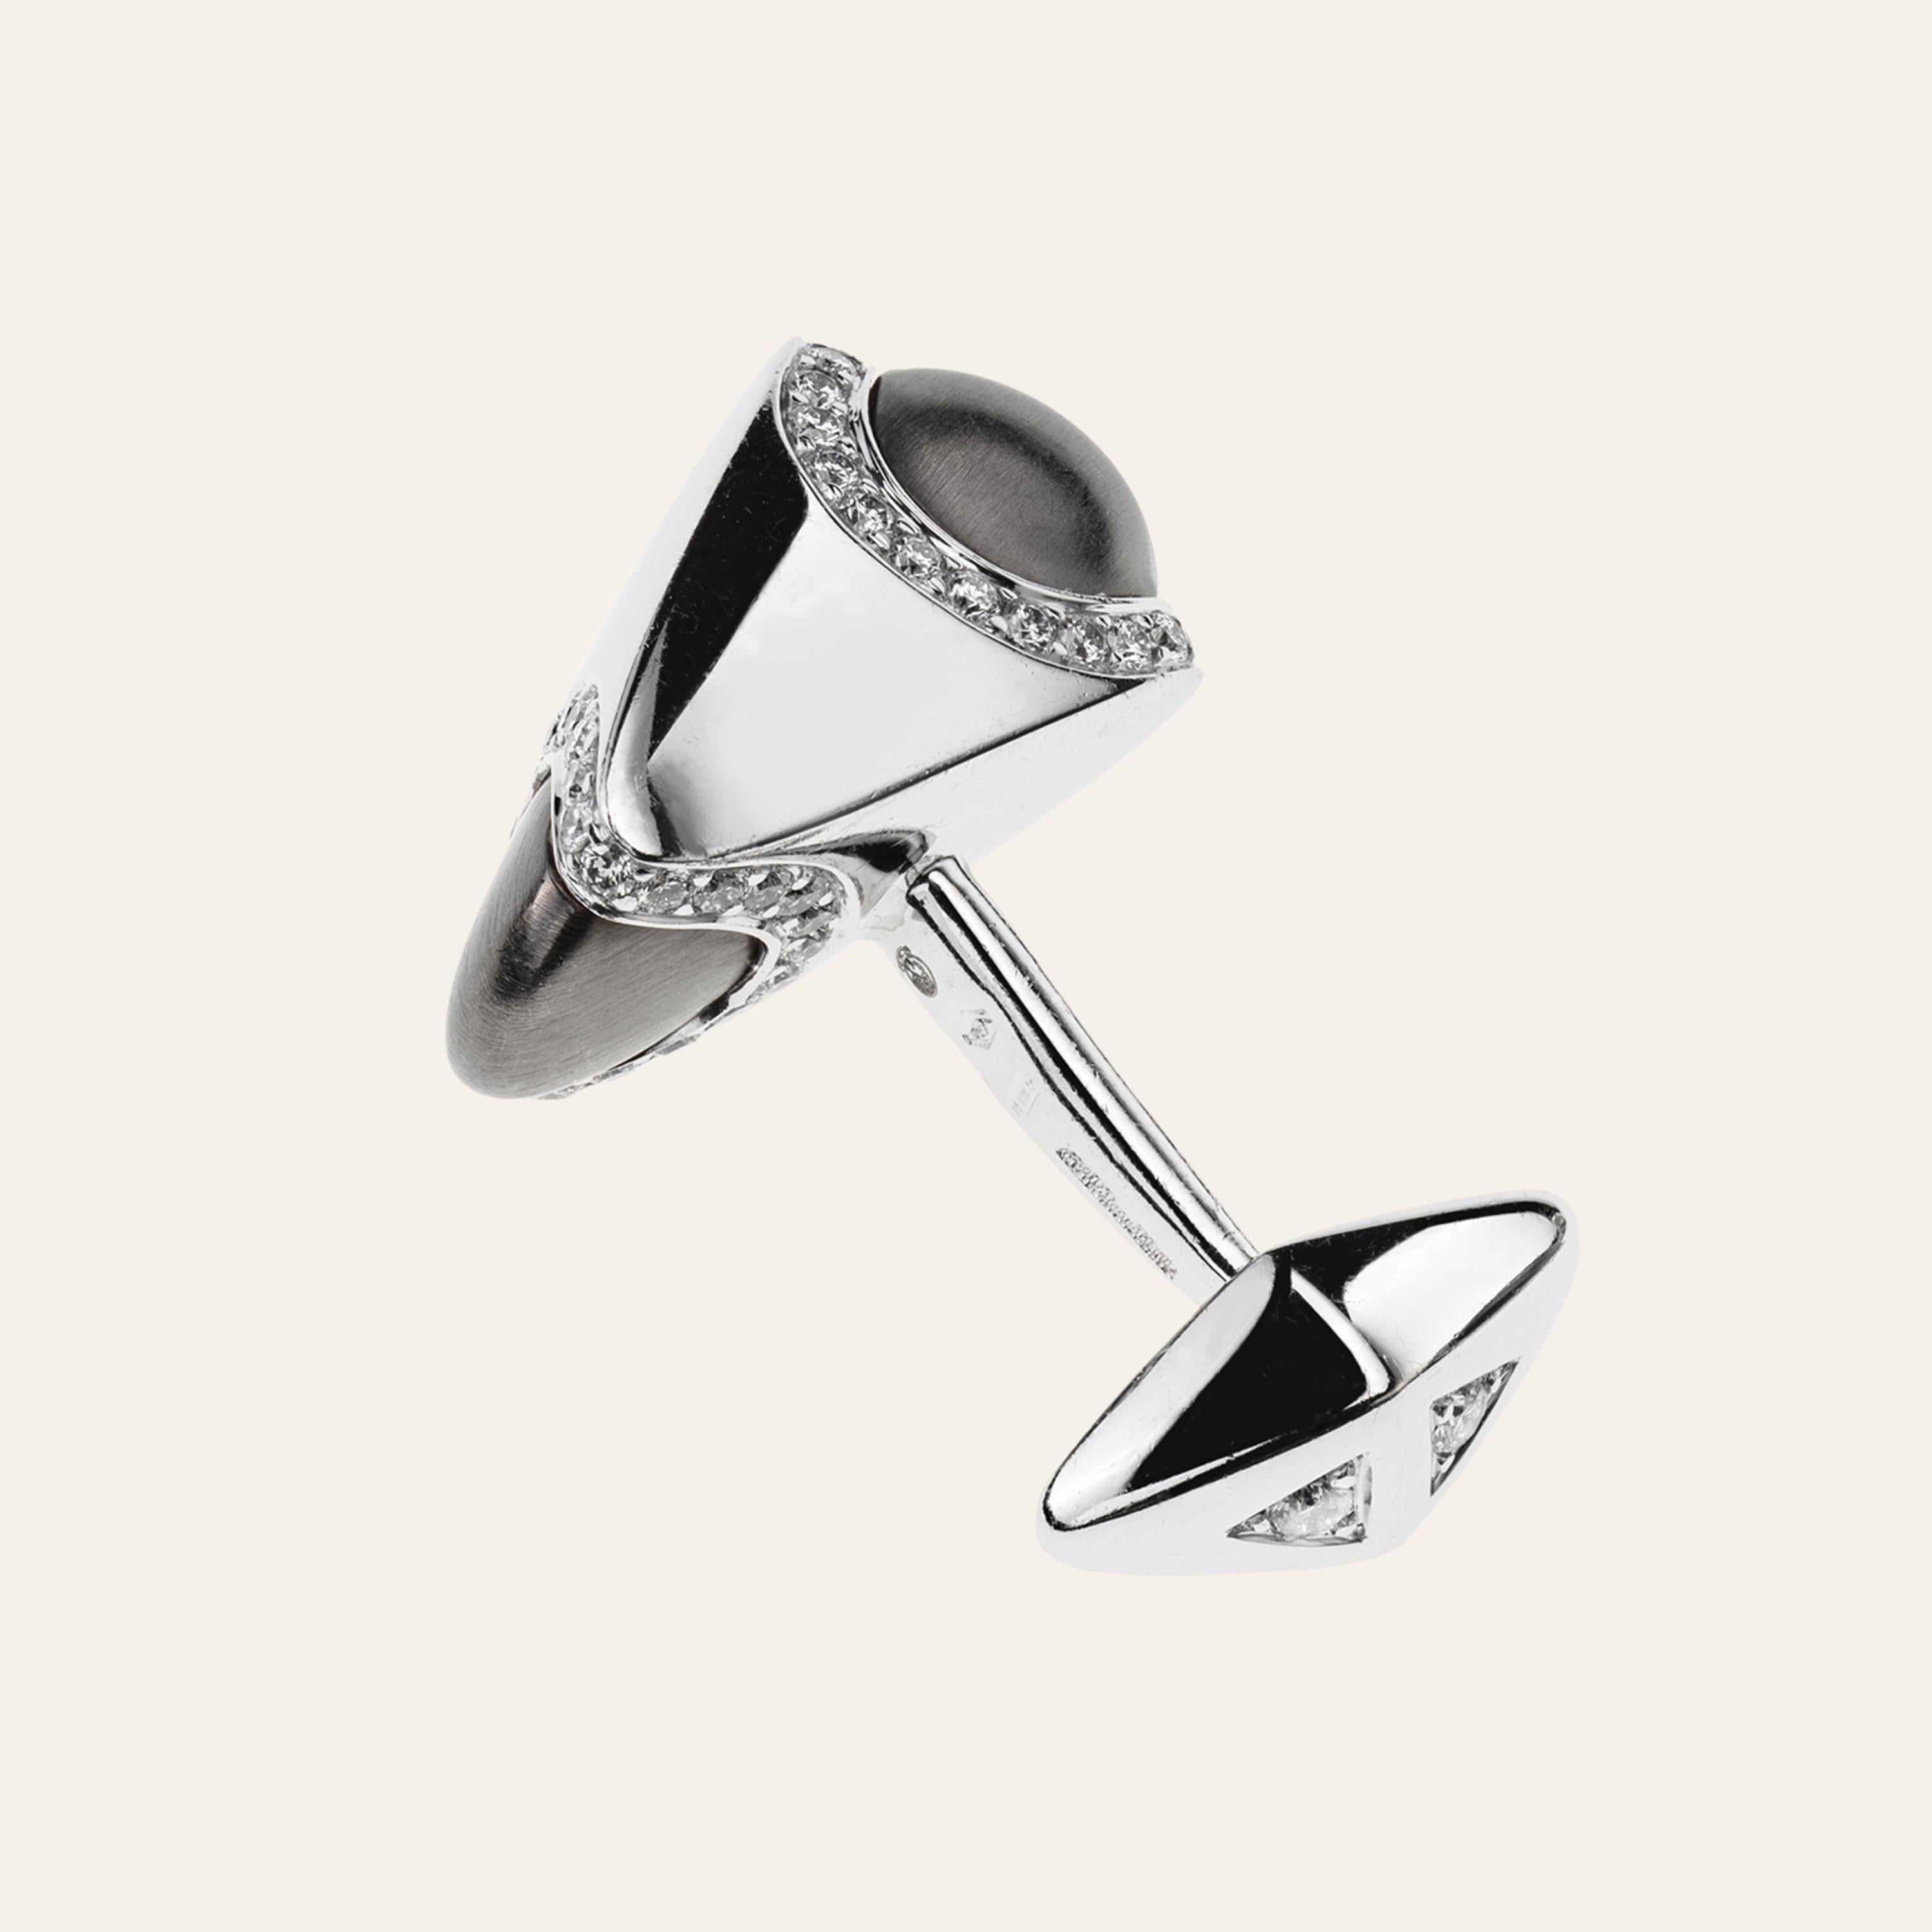 Sabbadini White Gold And Diamonds Cufflinks
18k White gold cufflinks, black rhodium, diamonds 1 carat. 
Gold 18,30 grams
Handmade & designed in Milan, in Via Montenapoleone.
This item comes directly from the Sabbadini boutique & is not a second hand